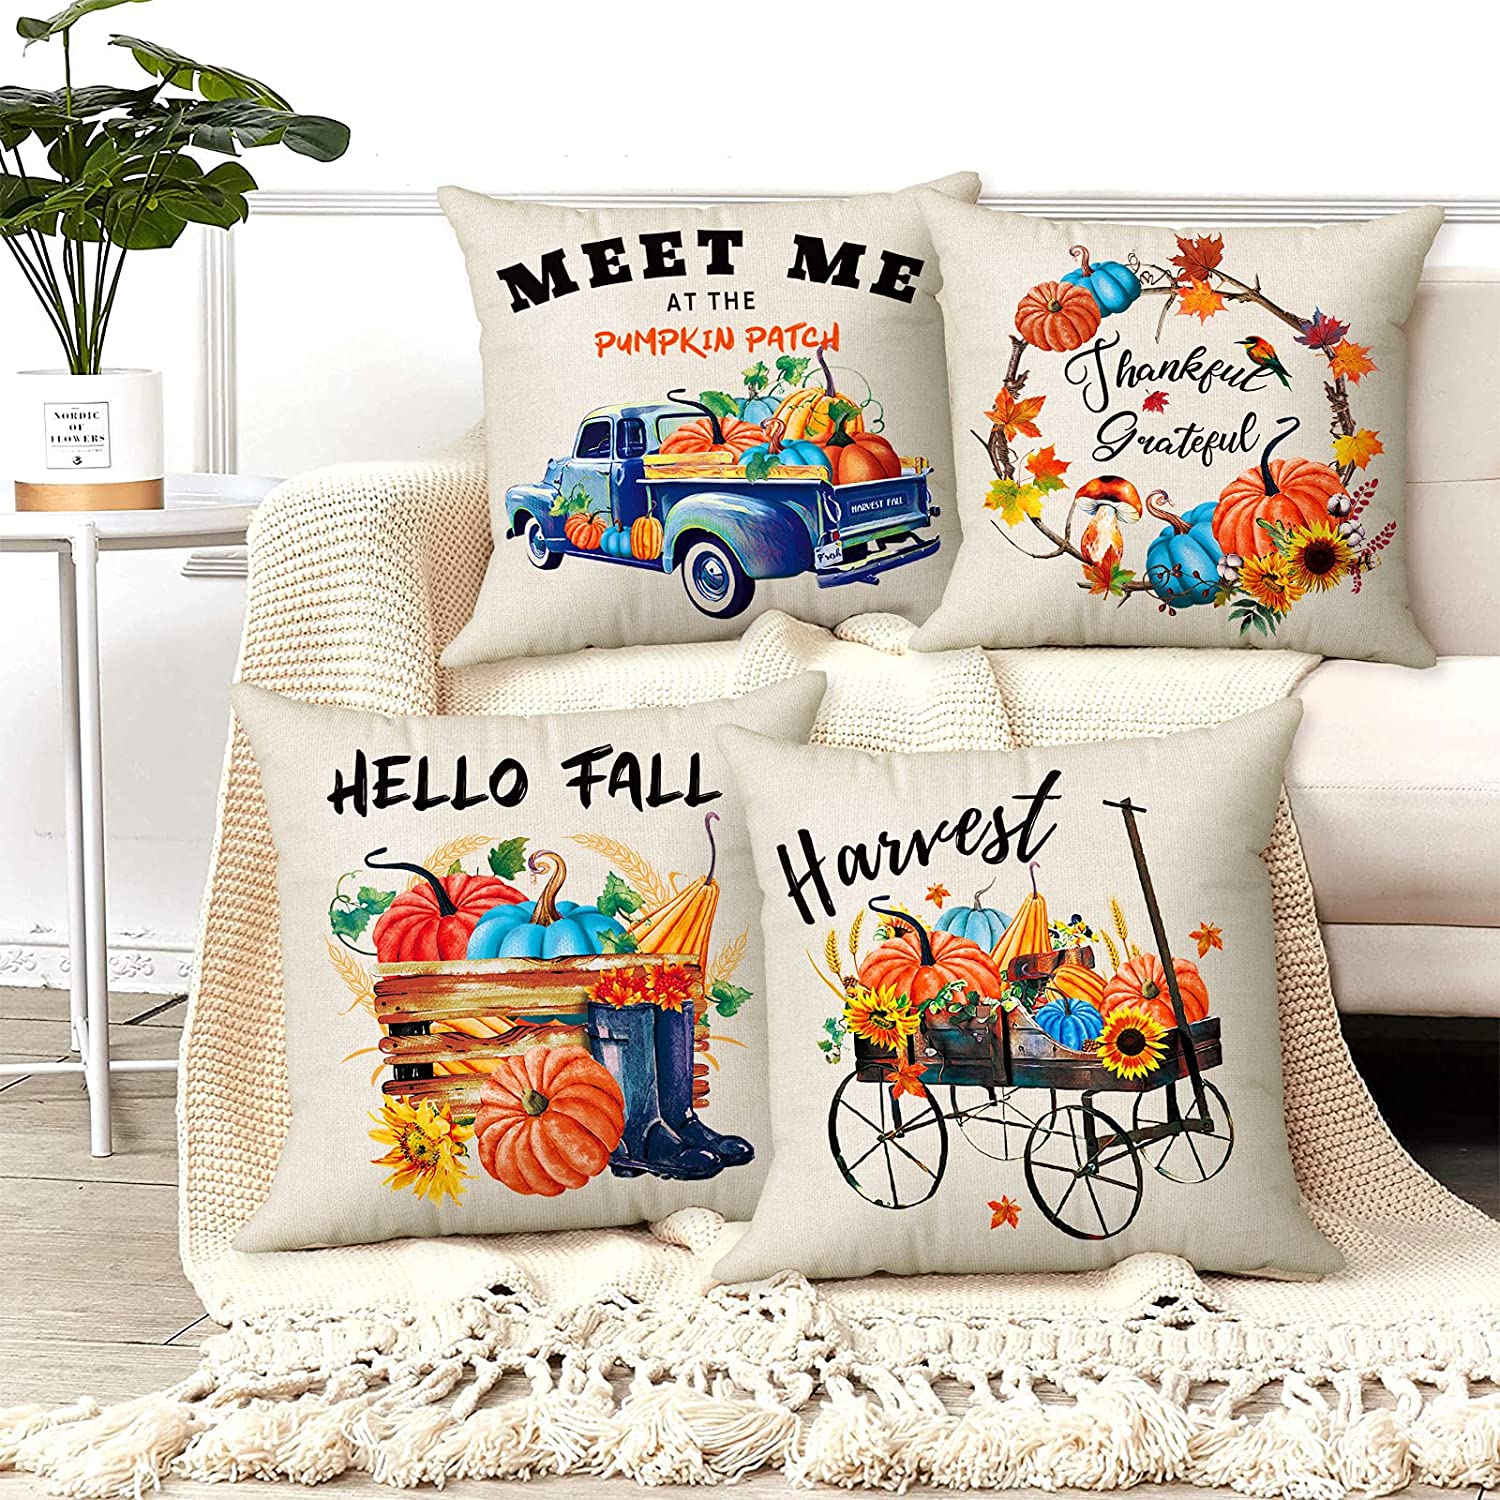 Set of 4 Hello Fall Pillow Covers 18x18 with 4 Bonus Coasters (Truck, Wreath)